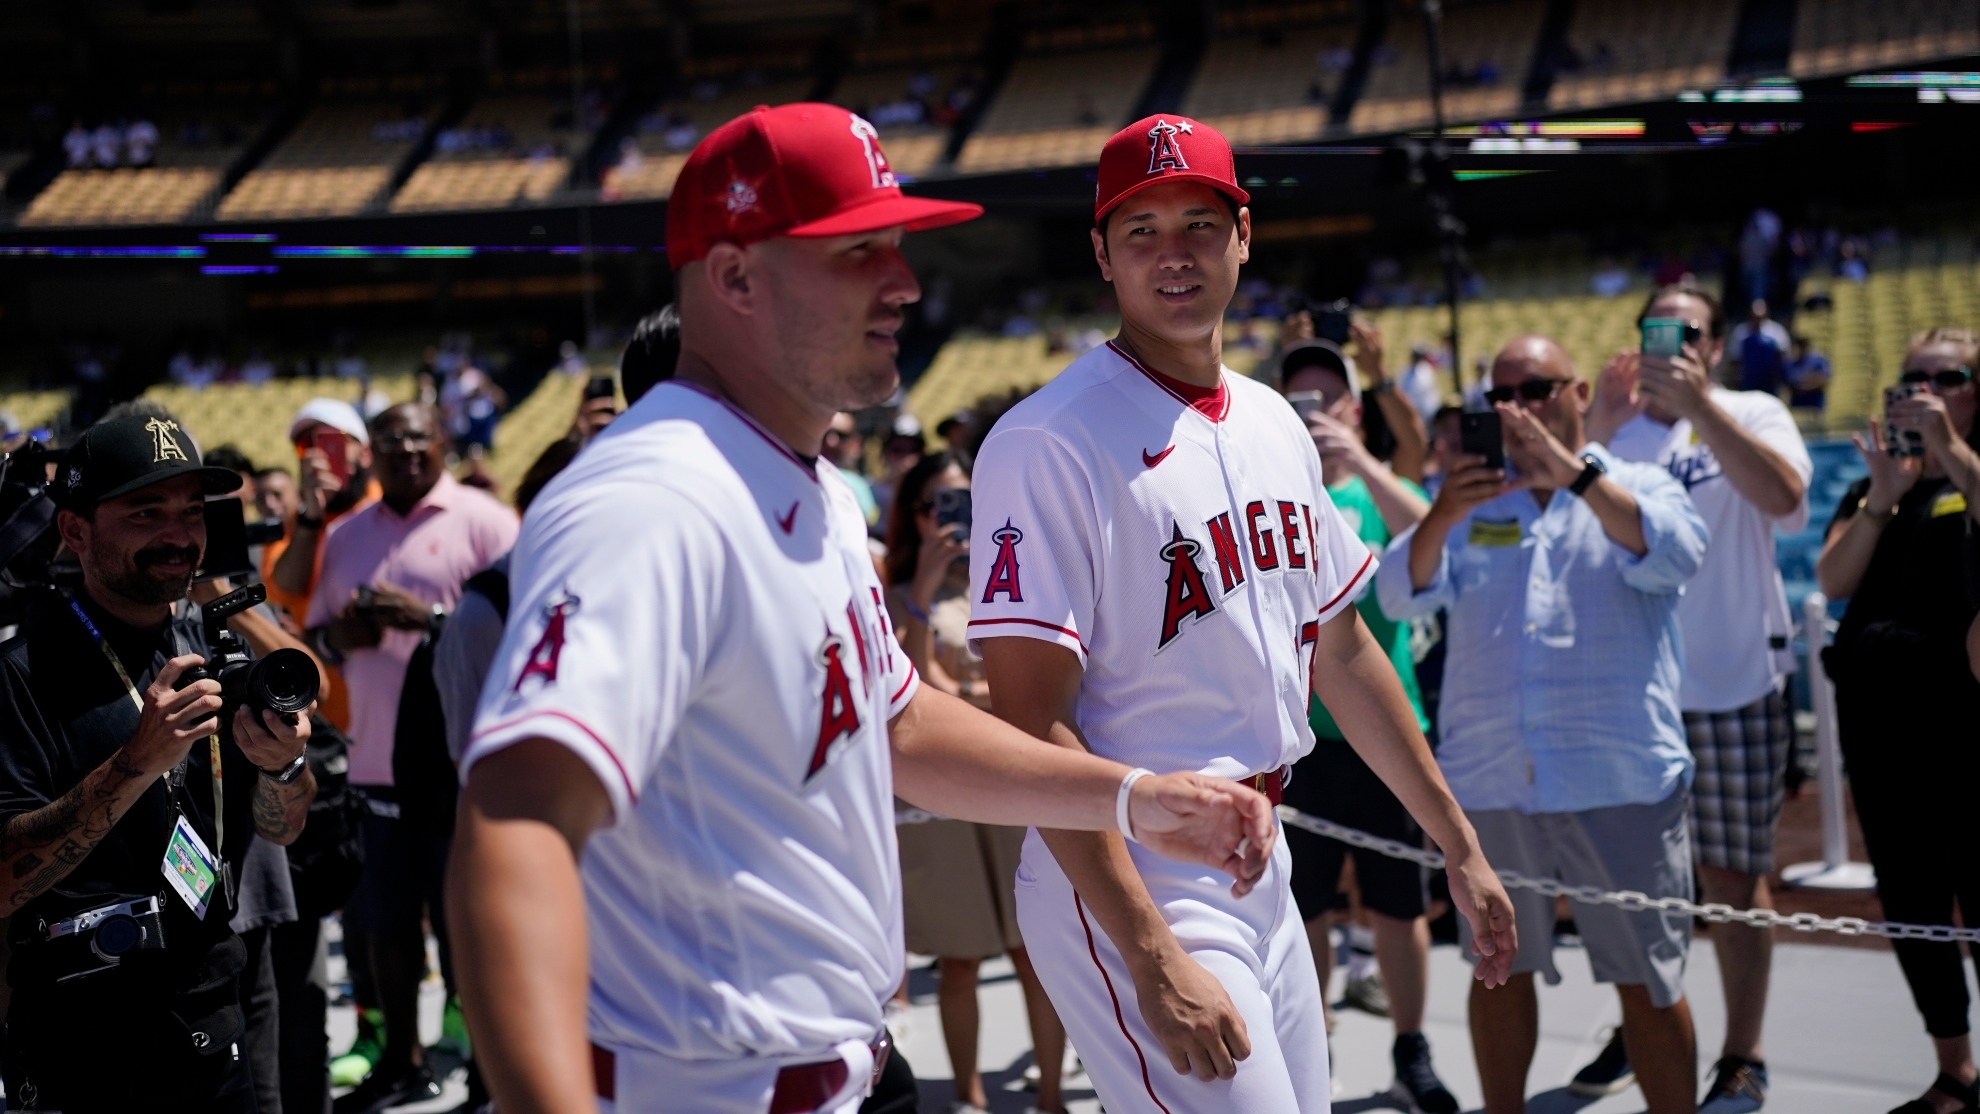 Mike Trout abd Shohei Ohtani at the MLB All-Star game